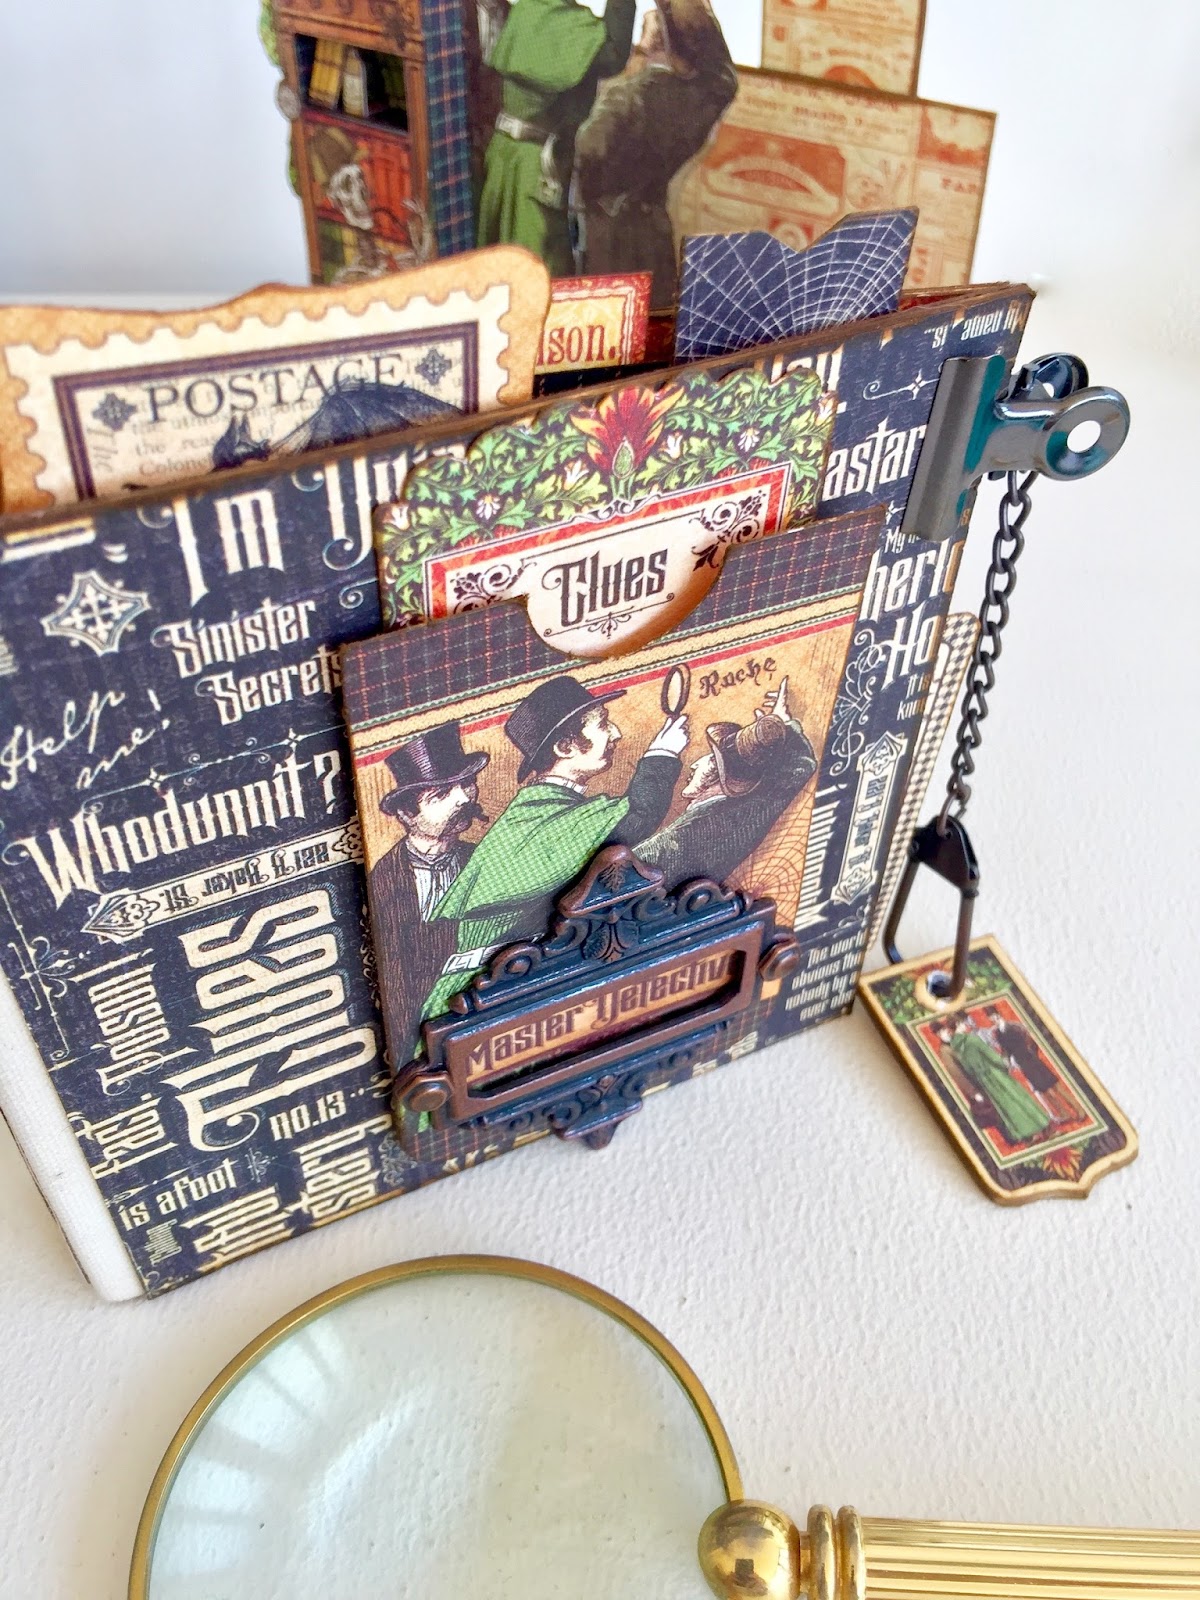 Stand and Mini Album Master Detective by Marina Blaukitchen Product by Graphic 45 photo 9.jpg